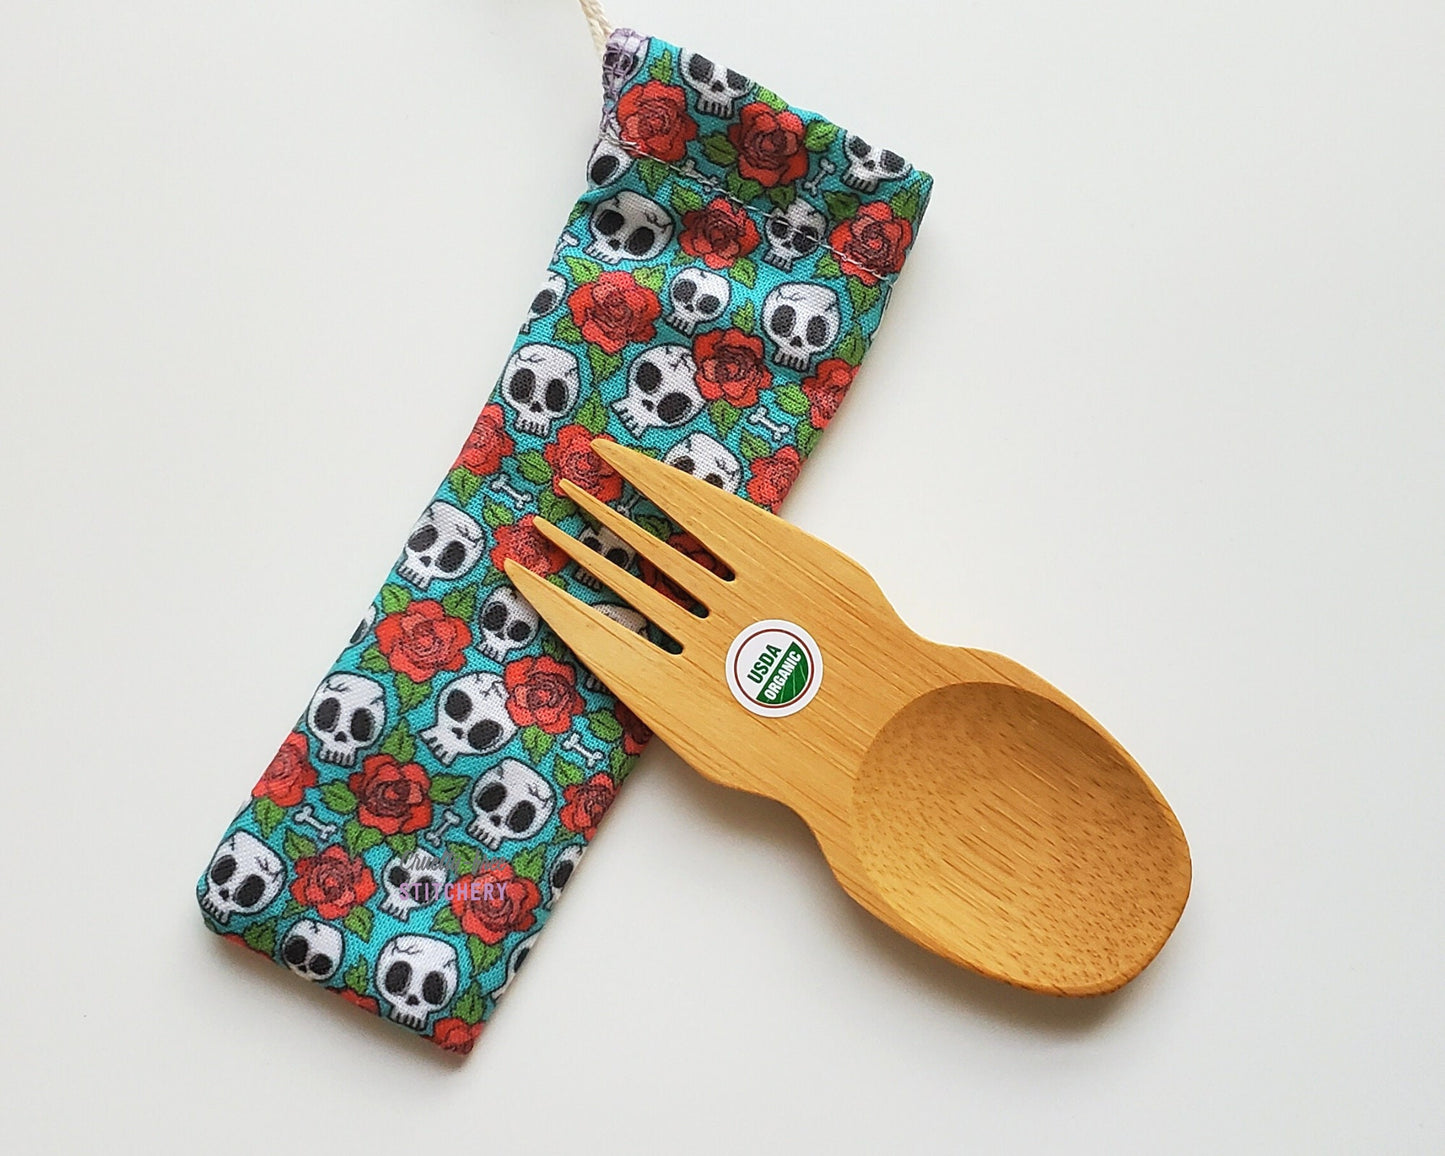 Reusable bamboo spork with pouch. The pouch is a blue fabric with tiny white skulls and red roses. The pouch is sitting diagonally with the spork partially on top pointing the other way. The spork is small, a double ended fork and spoon.